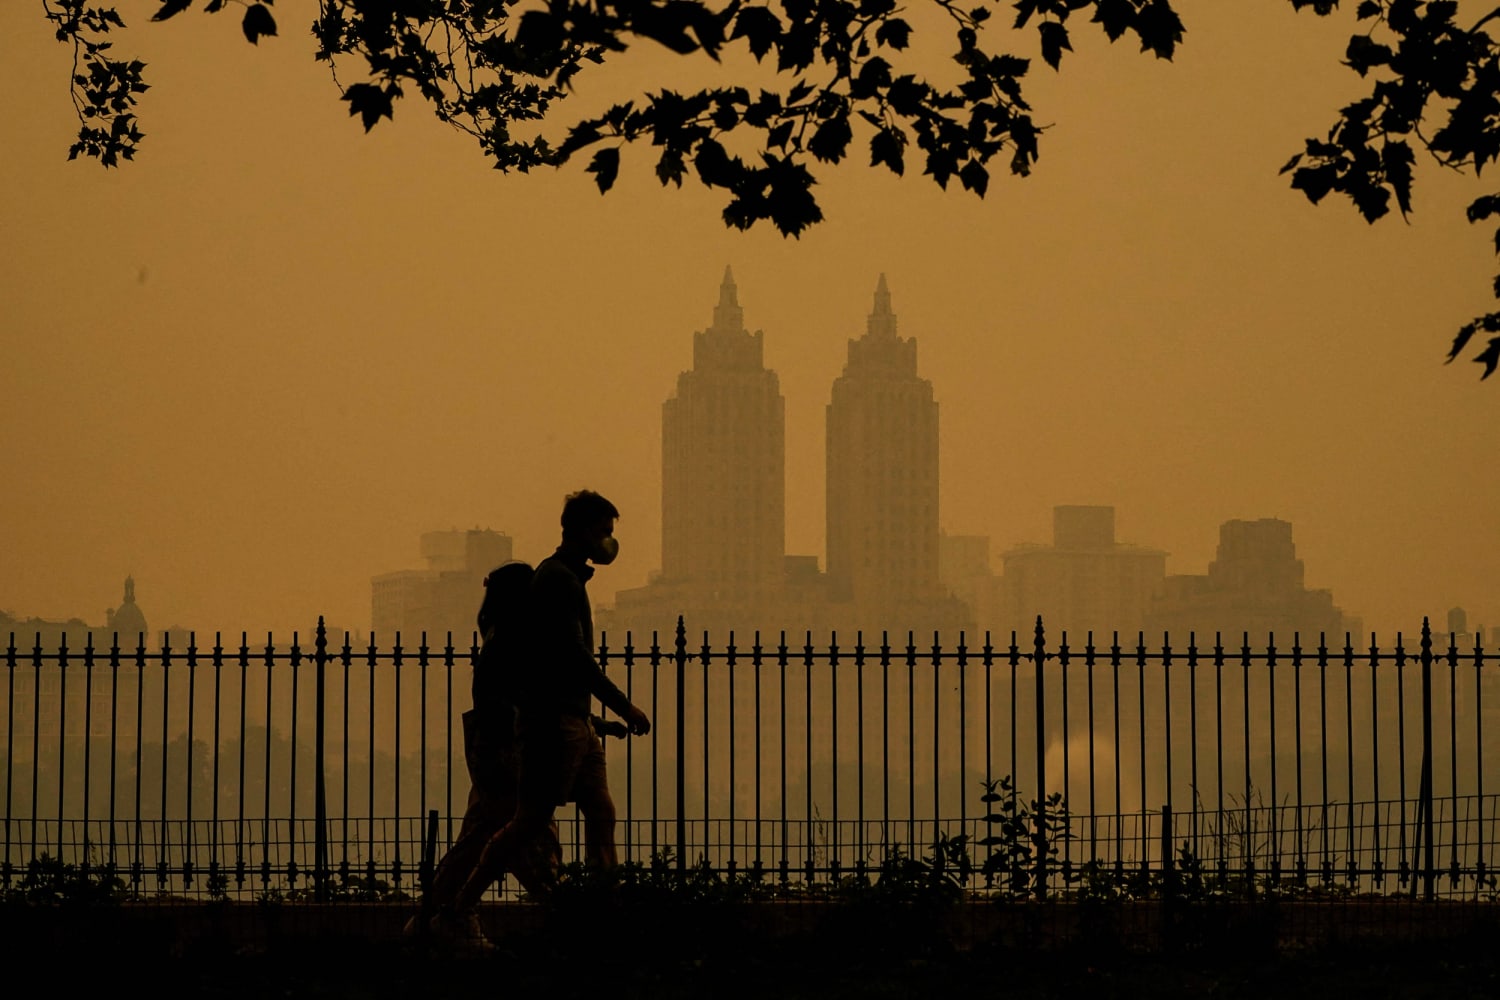 Asians in the U.S. say air quality ‘feels dangerously like home’